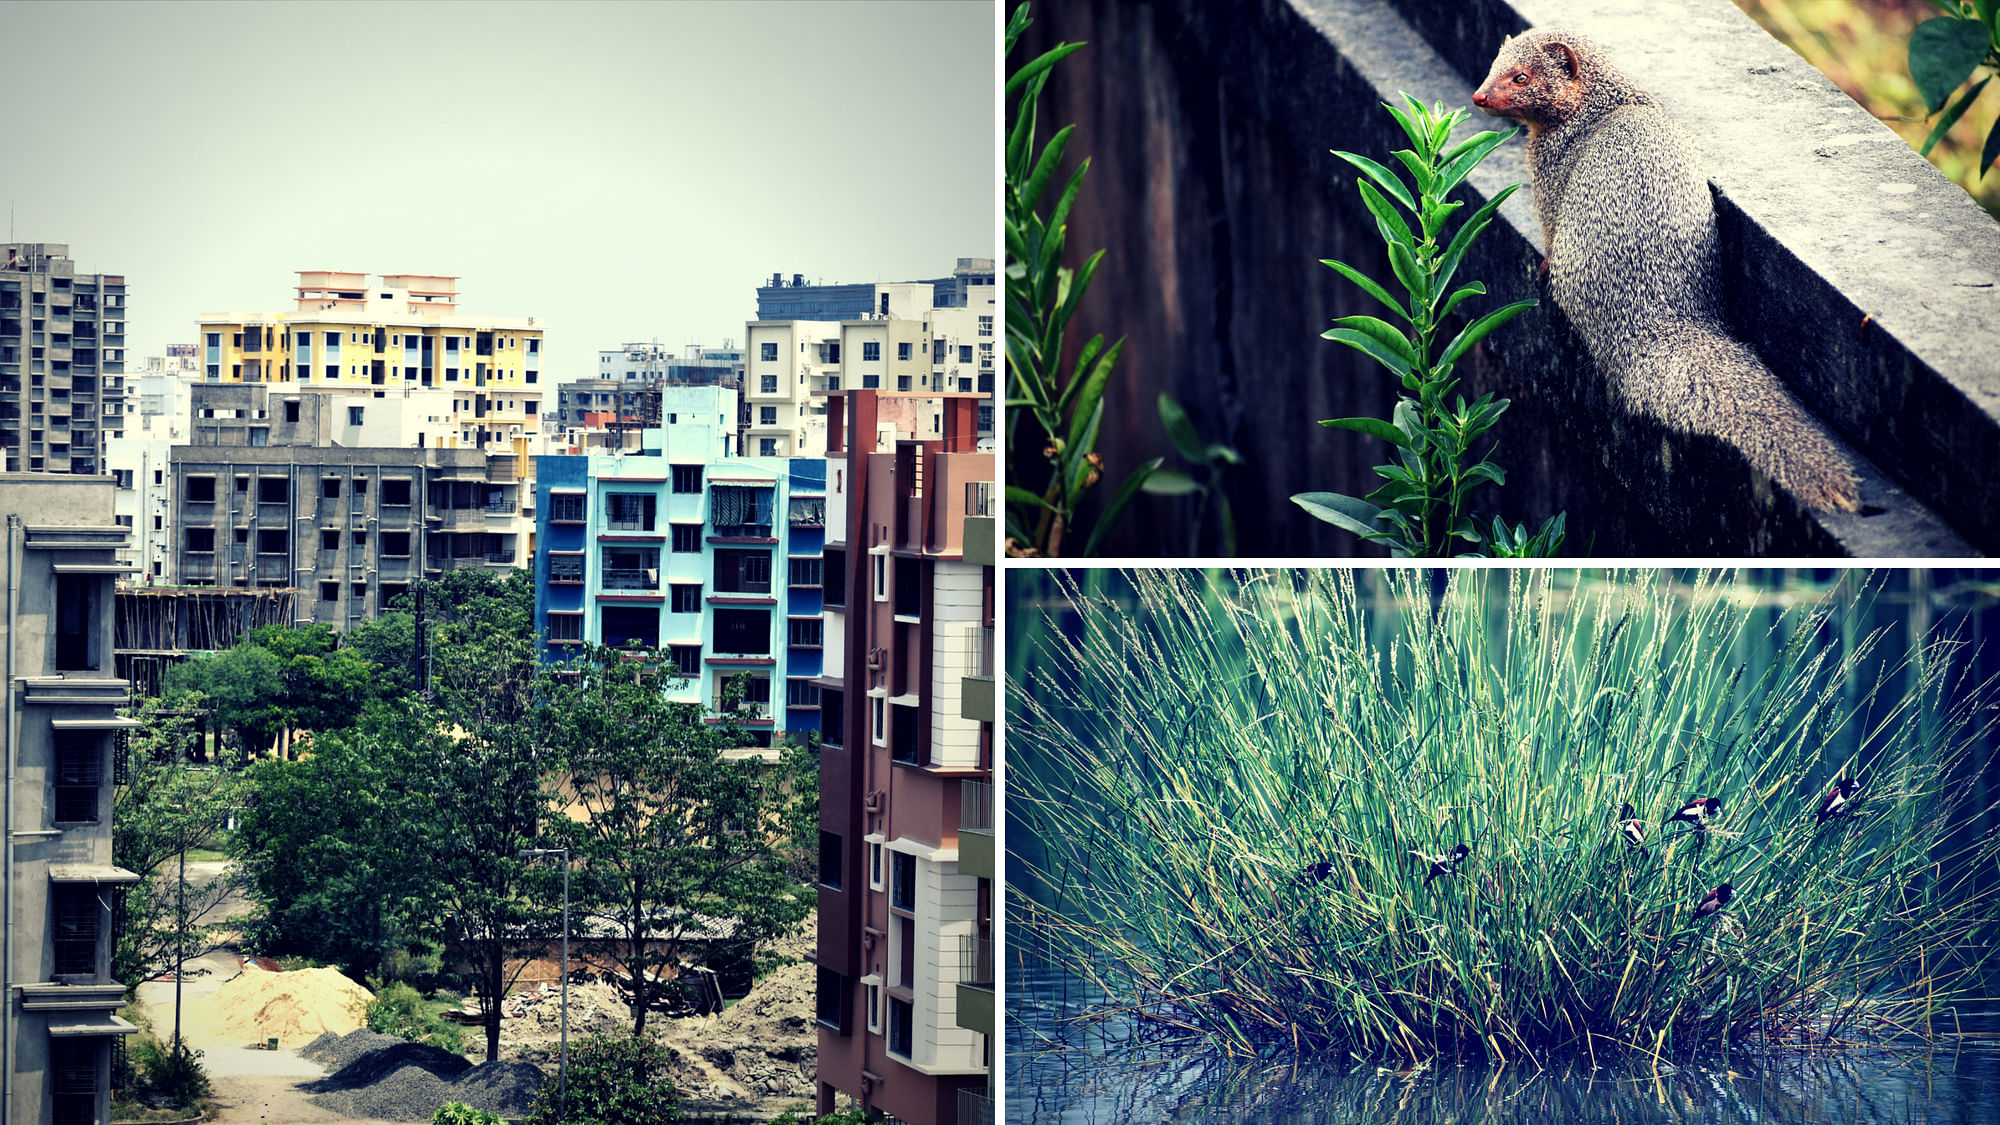 An urban forest is emerging in New Town, Rajarhat.